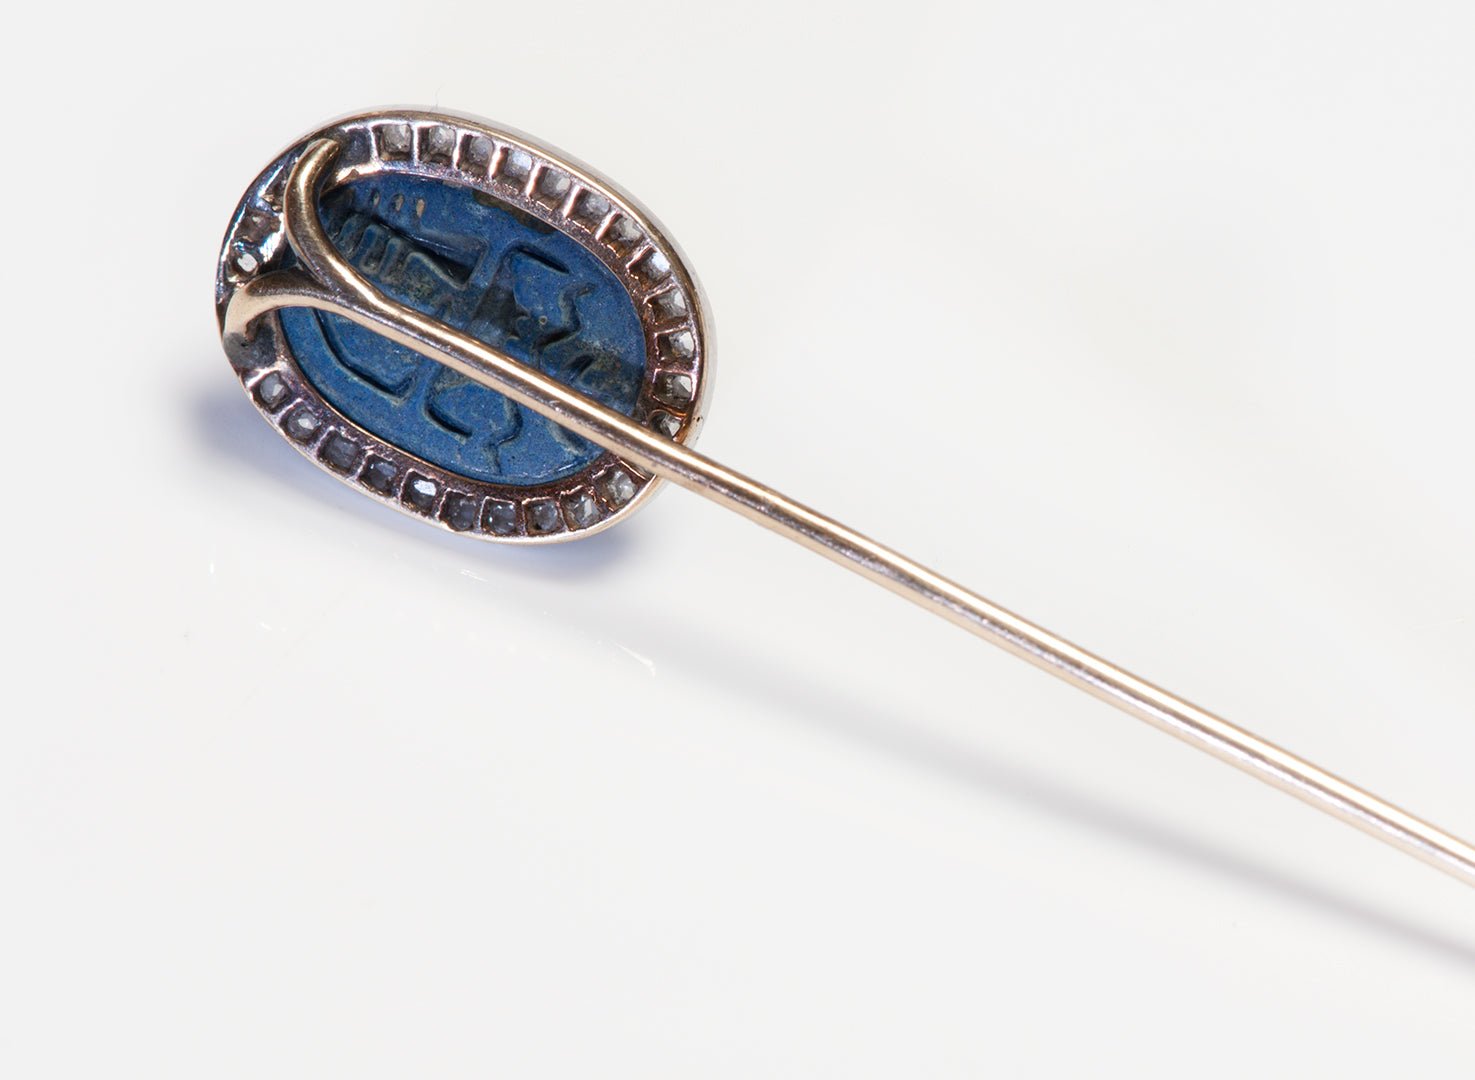 Antique Egyptian Revival Carved Scarab Lapis Diamond Gold Stick Pin